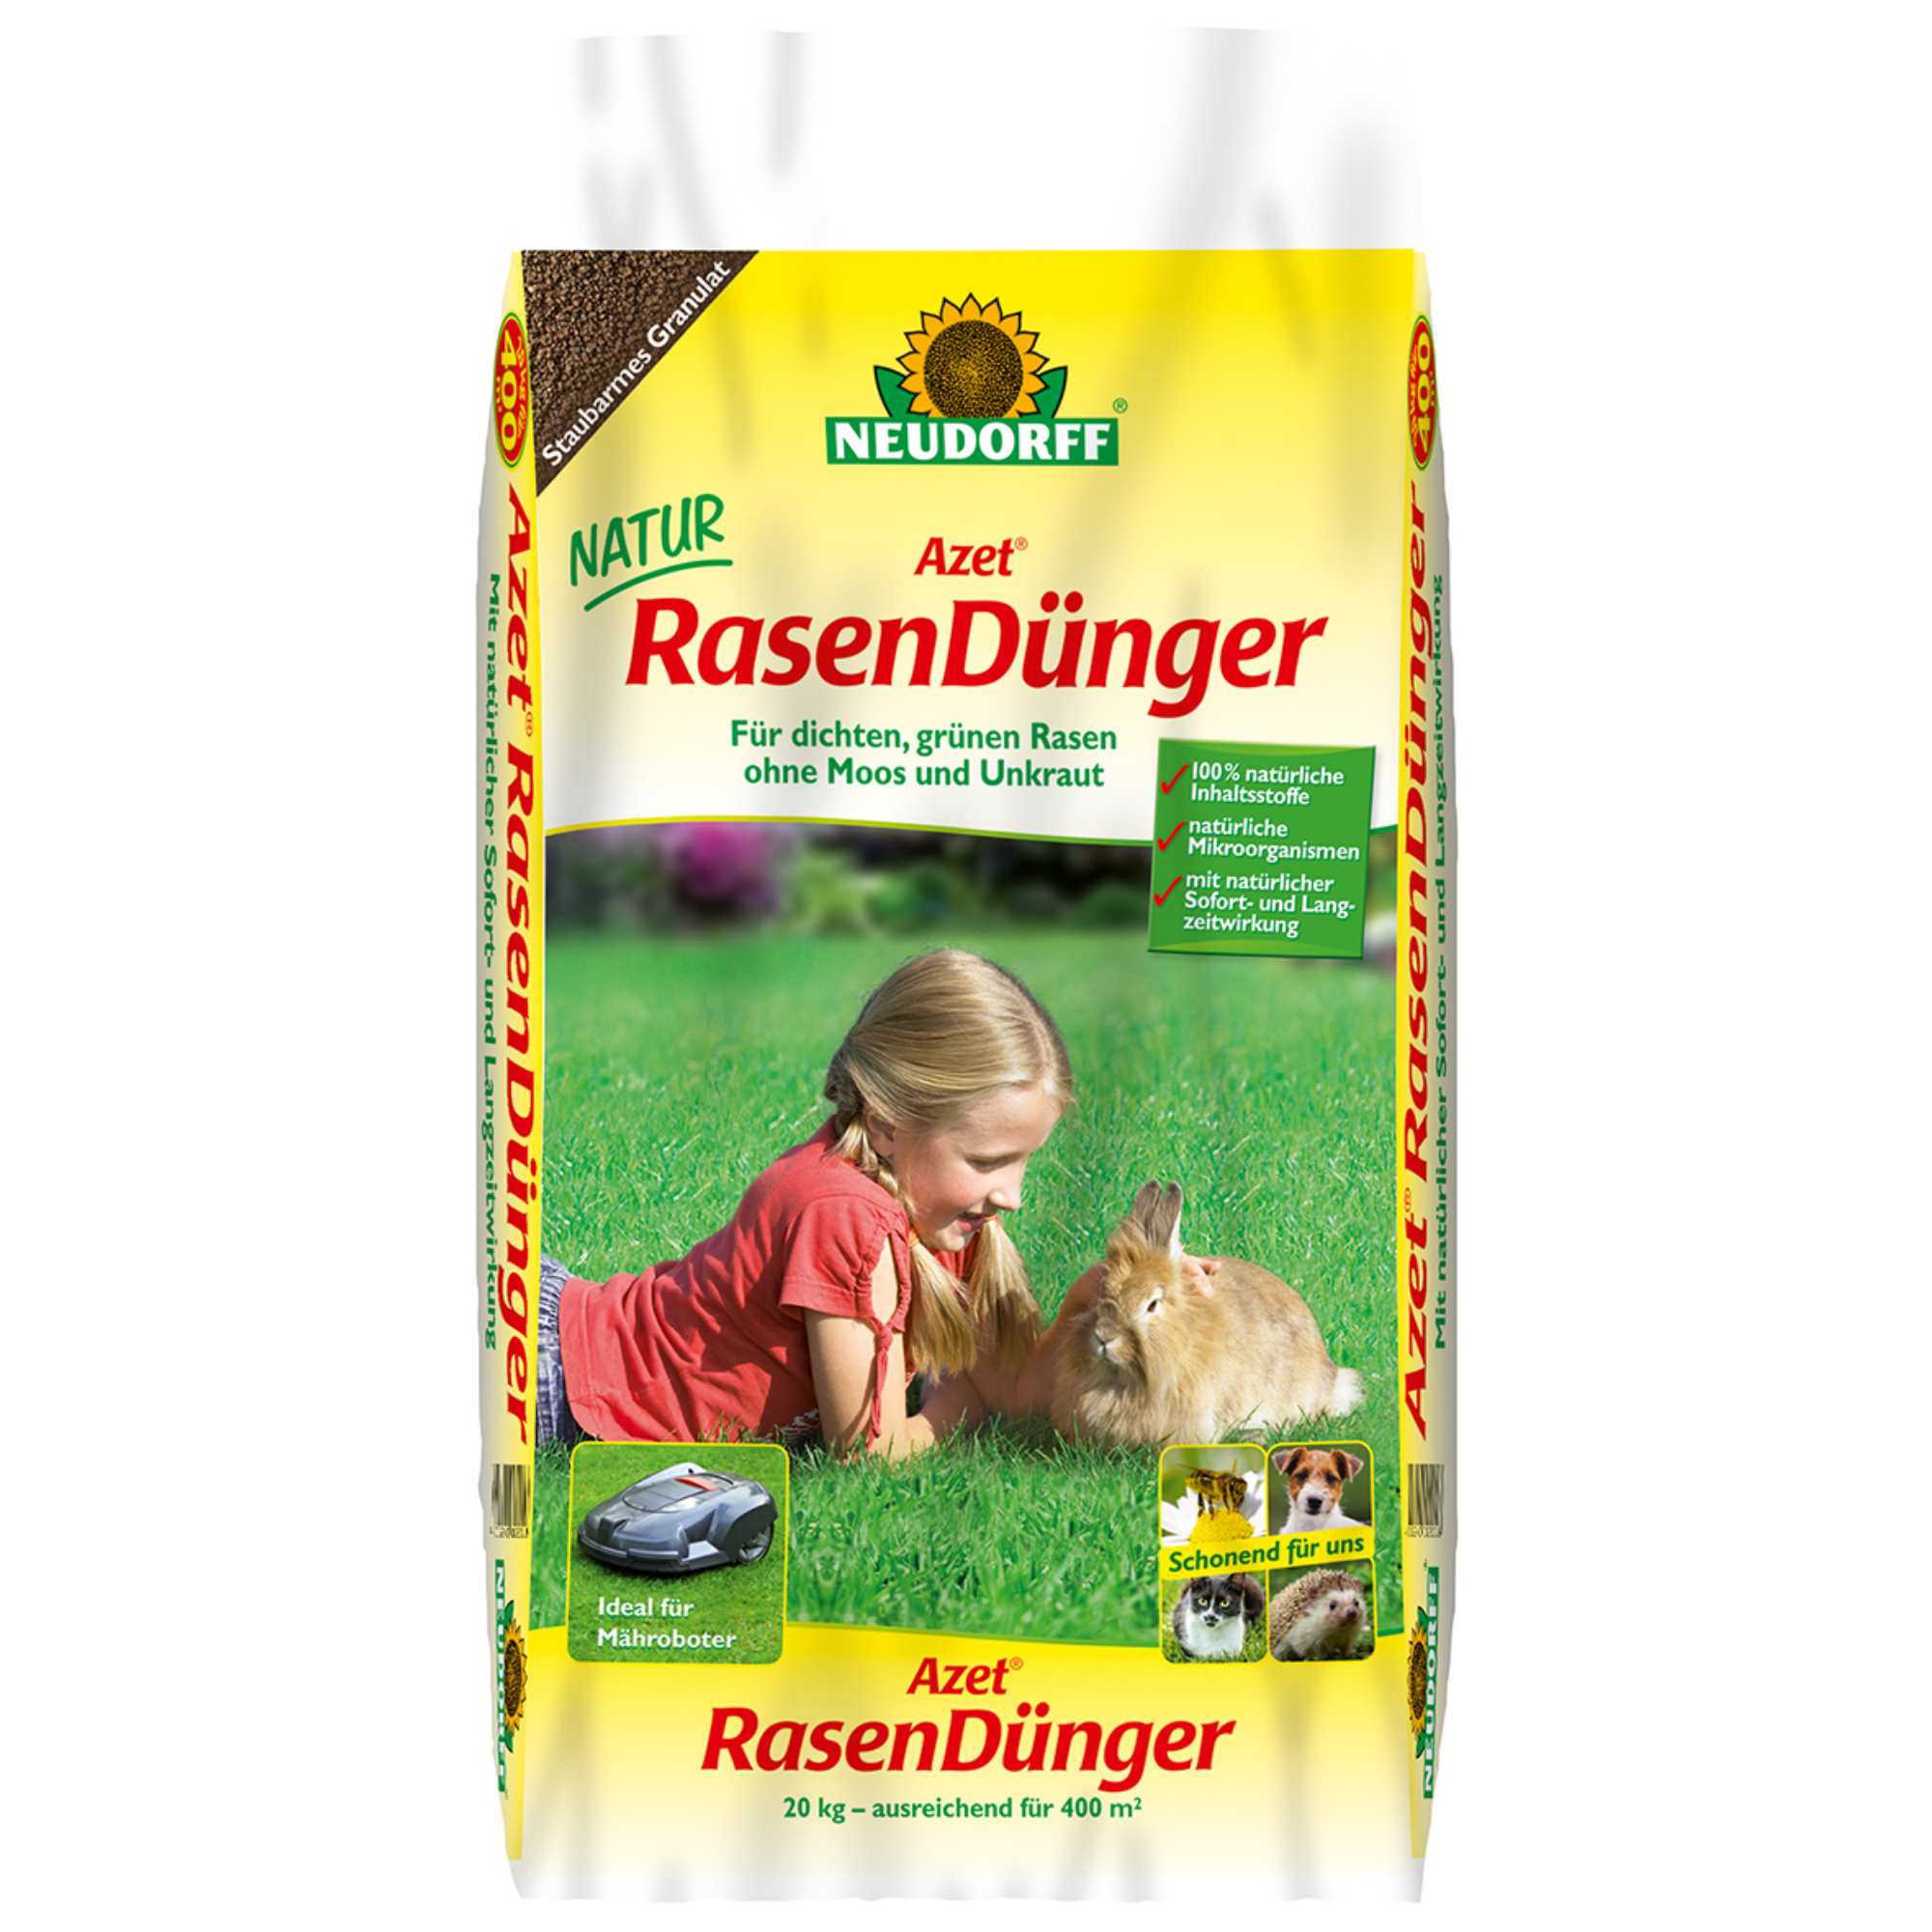 Rasendünger Azet 20 kg + product picture